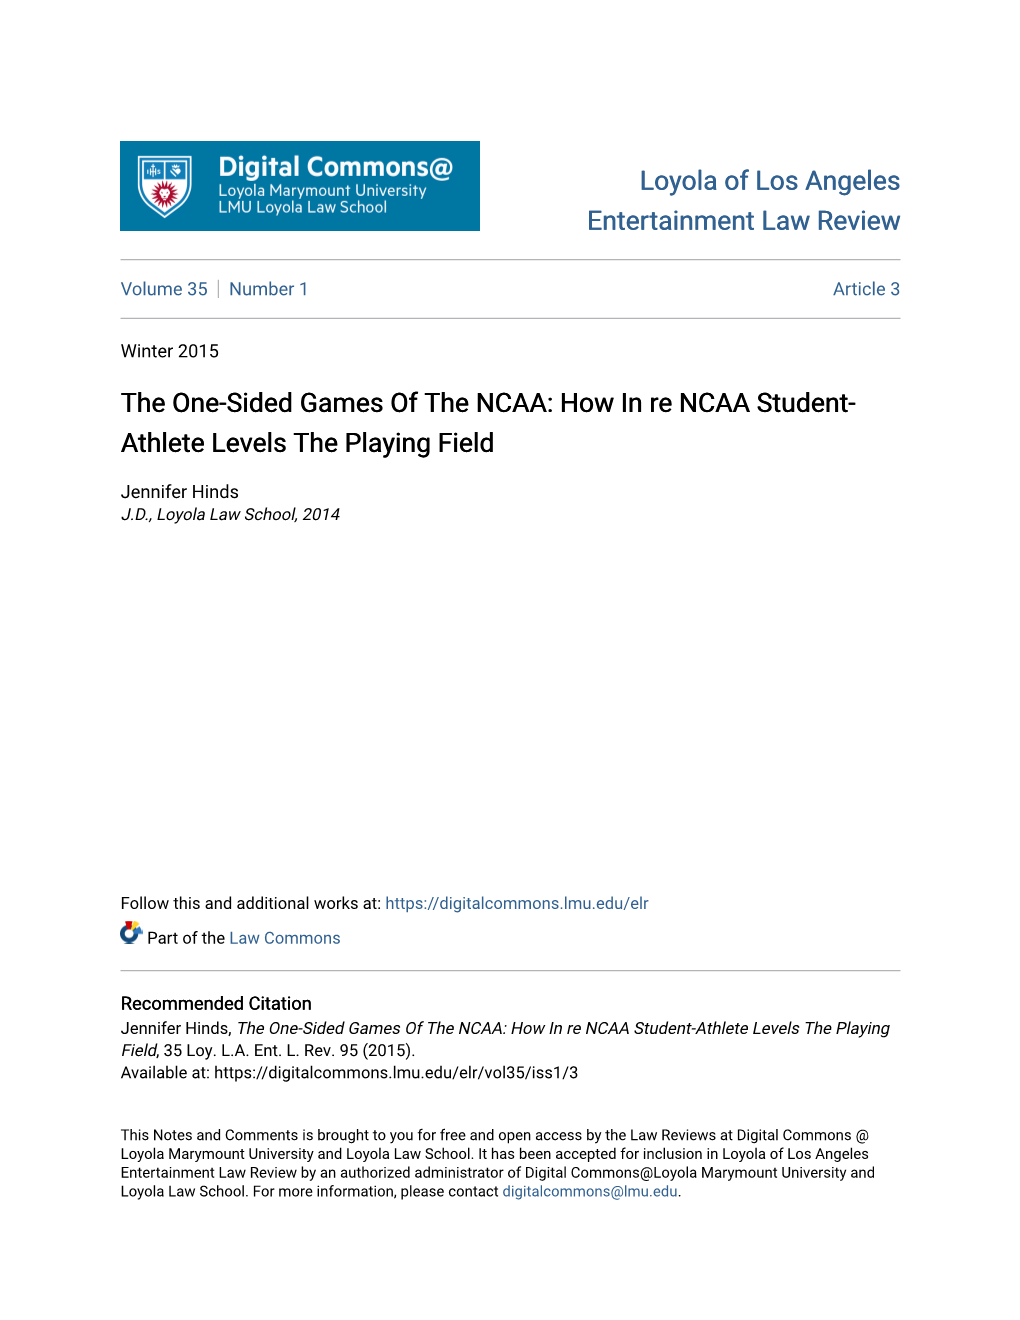 The One-Sided Games of the NCAA: How in Re NCAA Student- Athlete Levels the Playing Field